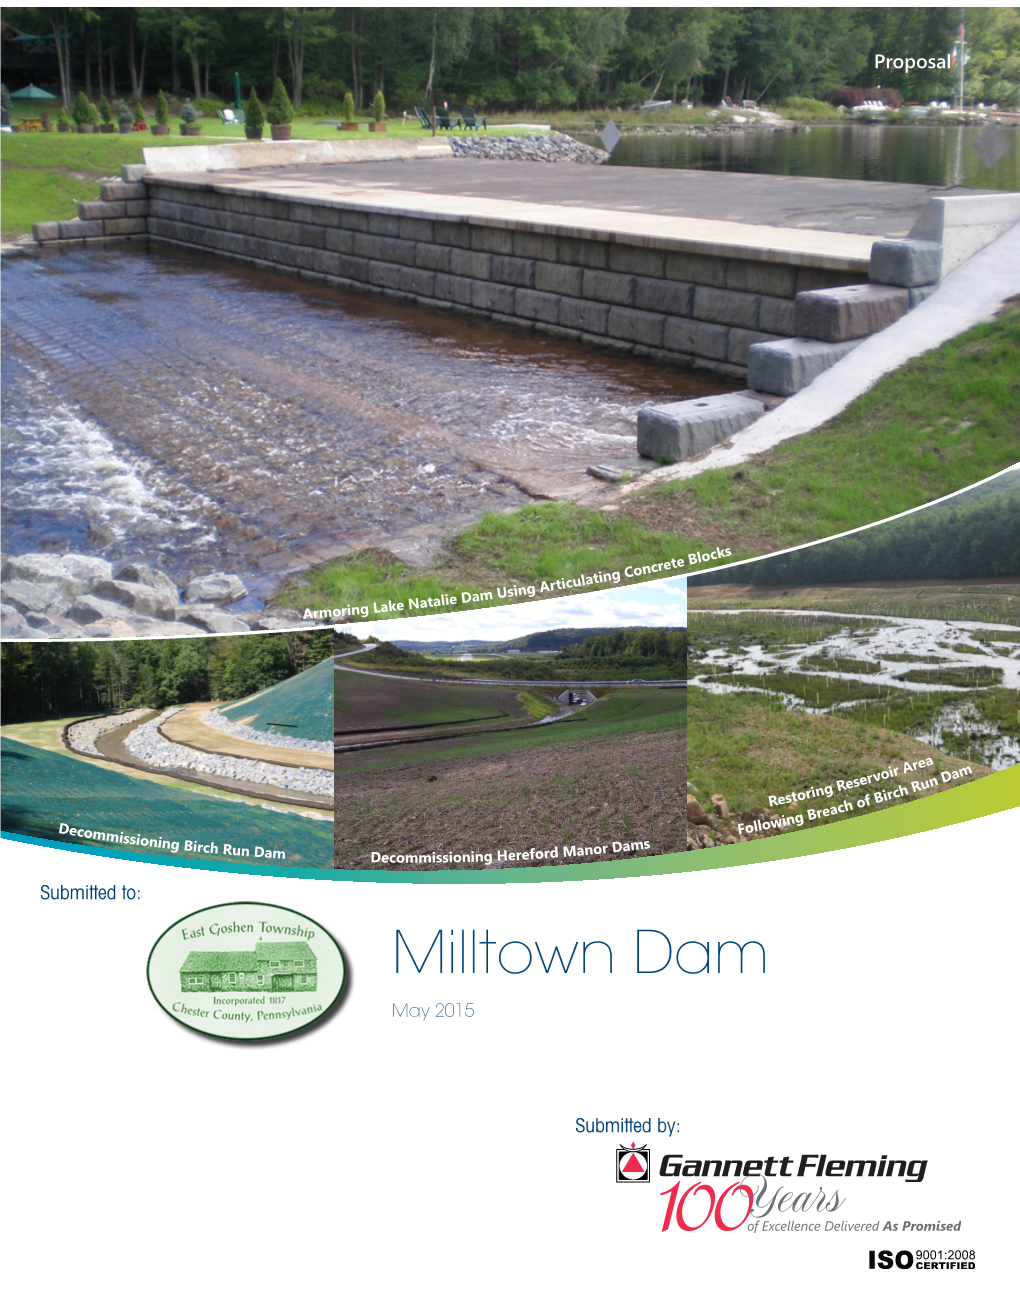 Gannett Fleming Is a Nationally Recognized Leader in the Dam Industry